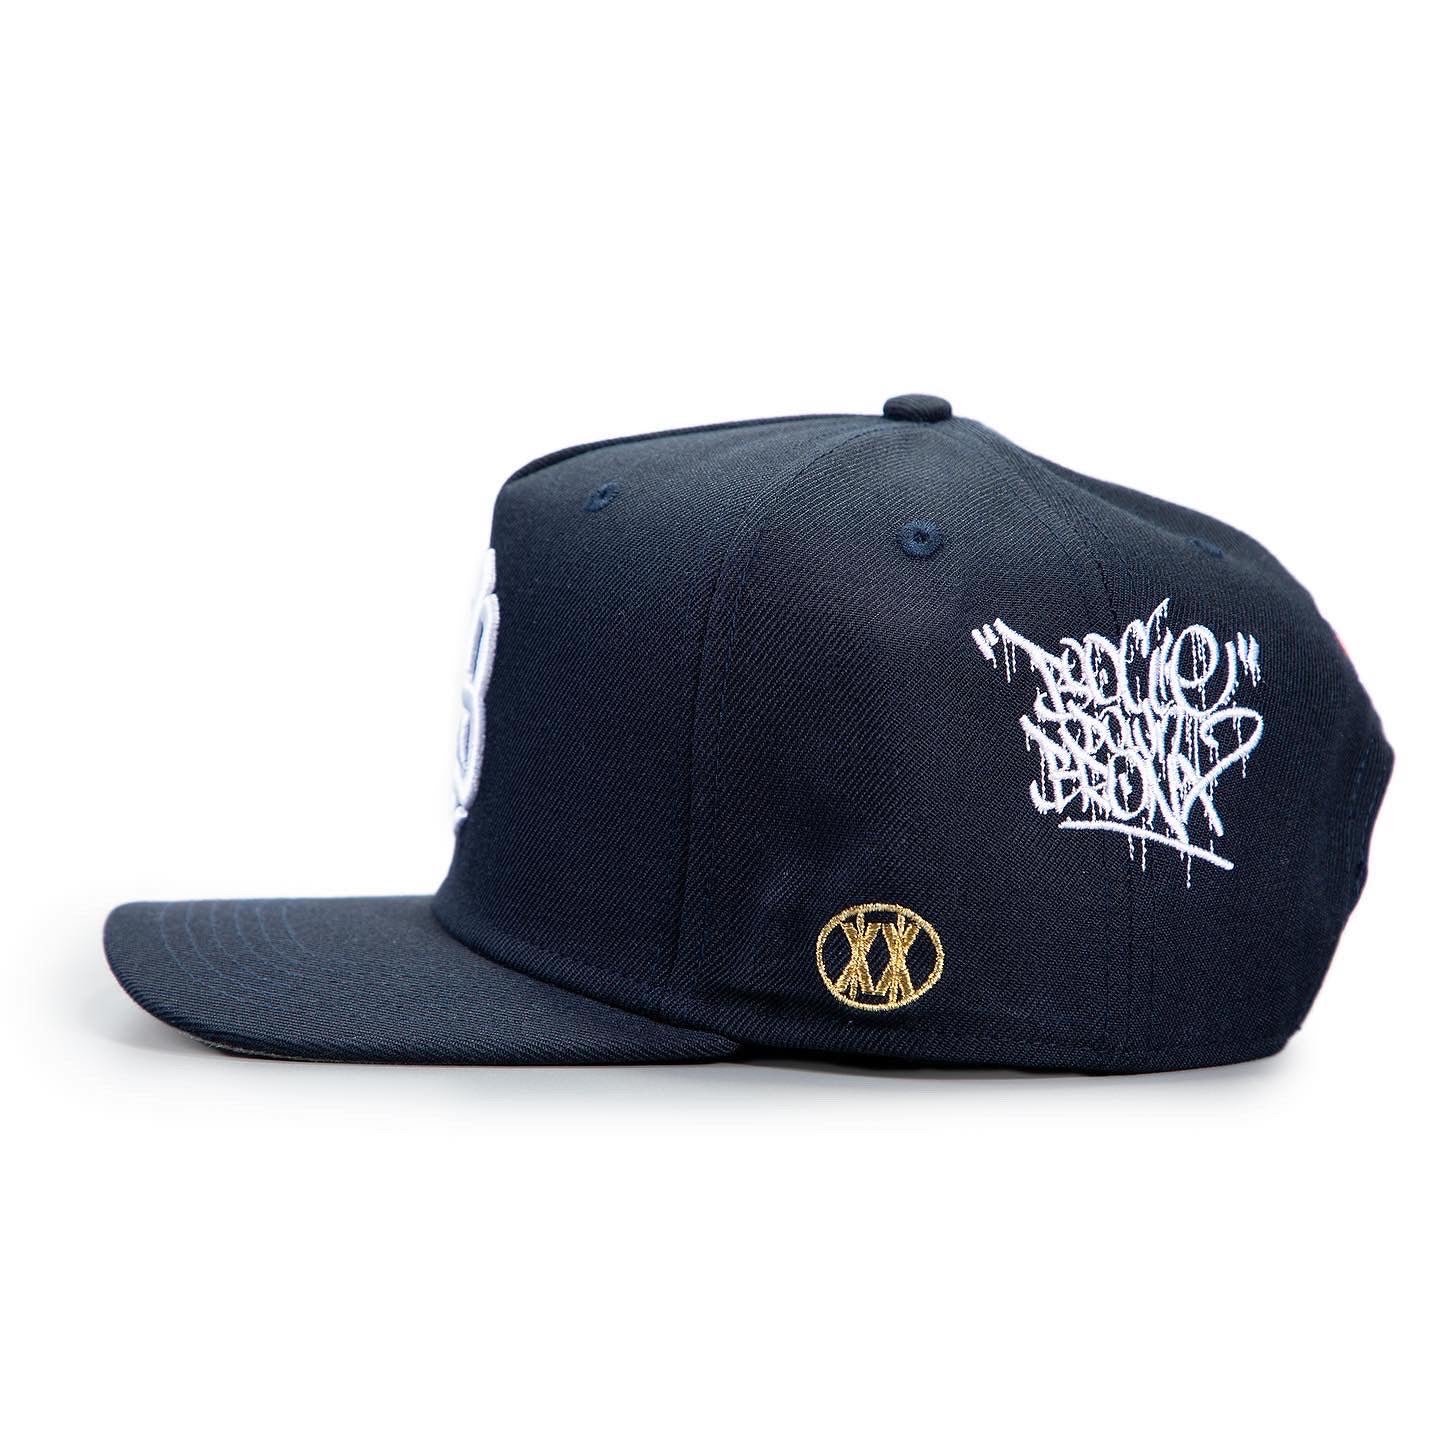 BX The Bronx Script Snapback Hat by Kings of NY Blue / Os